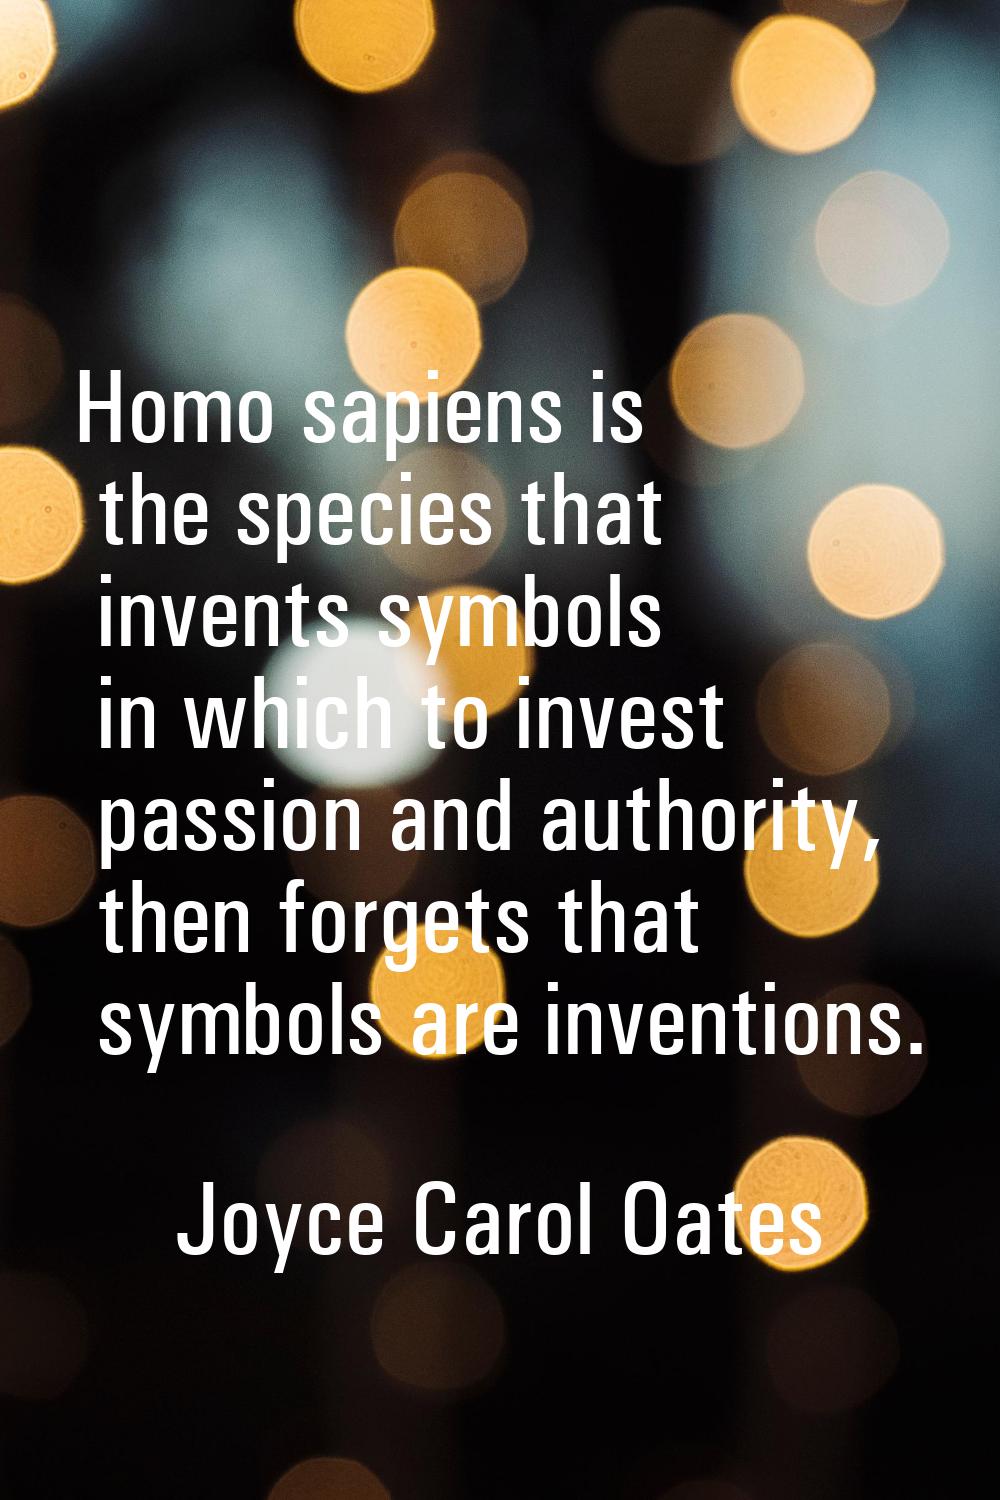 Homo sapiens is the species that invents symbols in which to invest passion and authority, then for